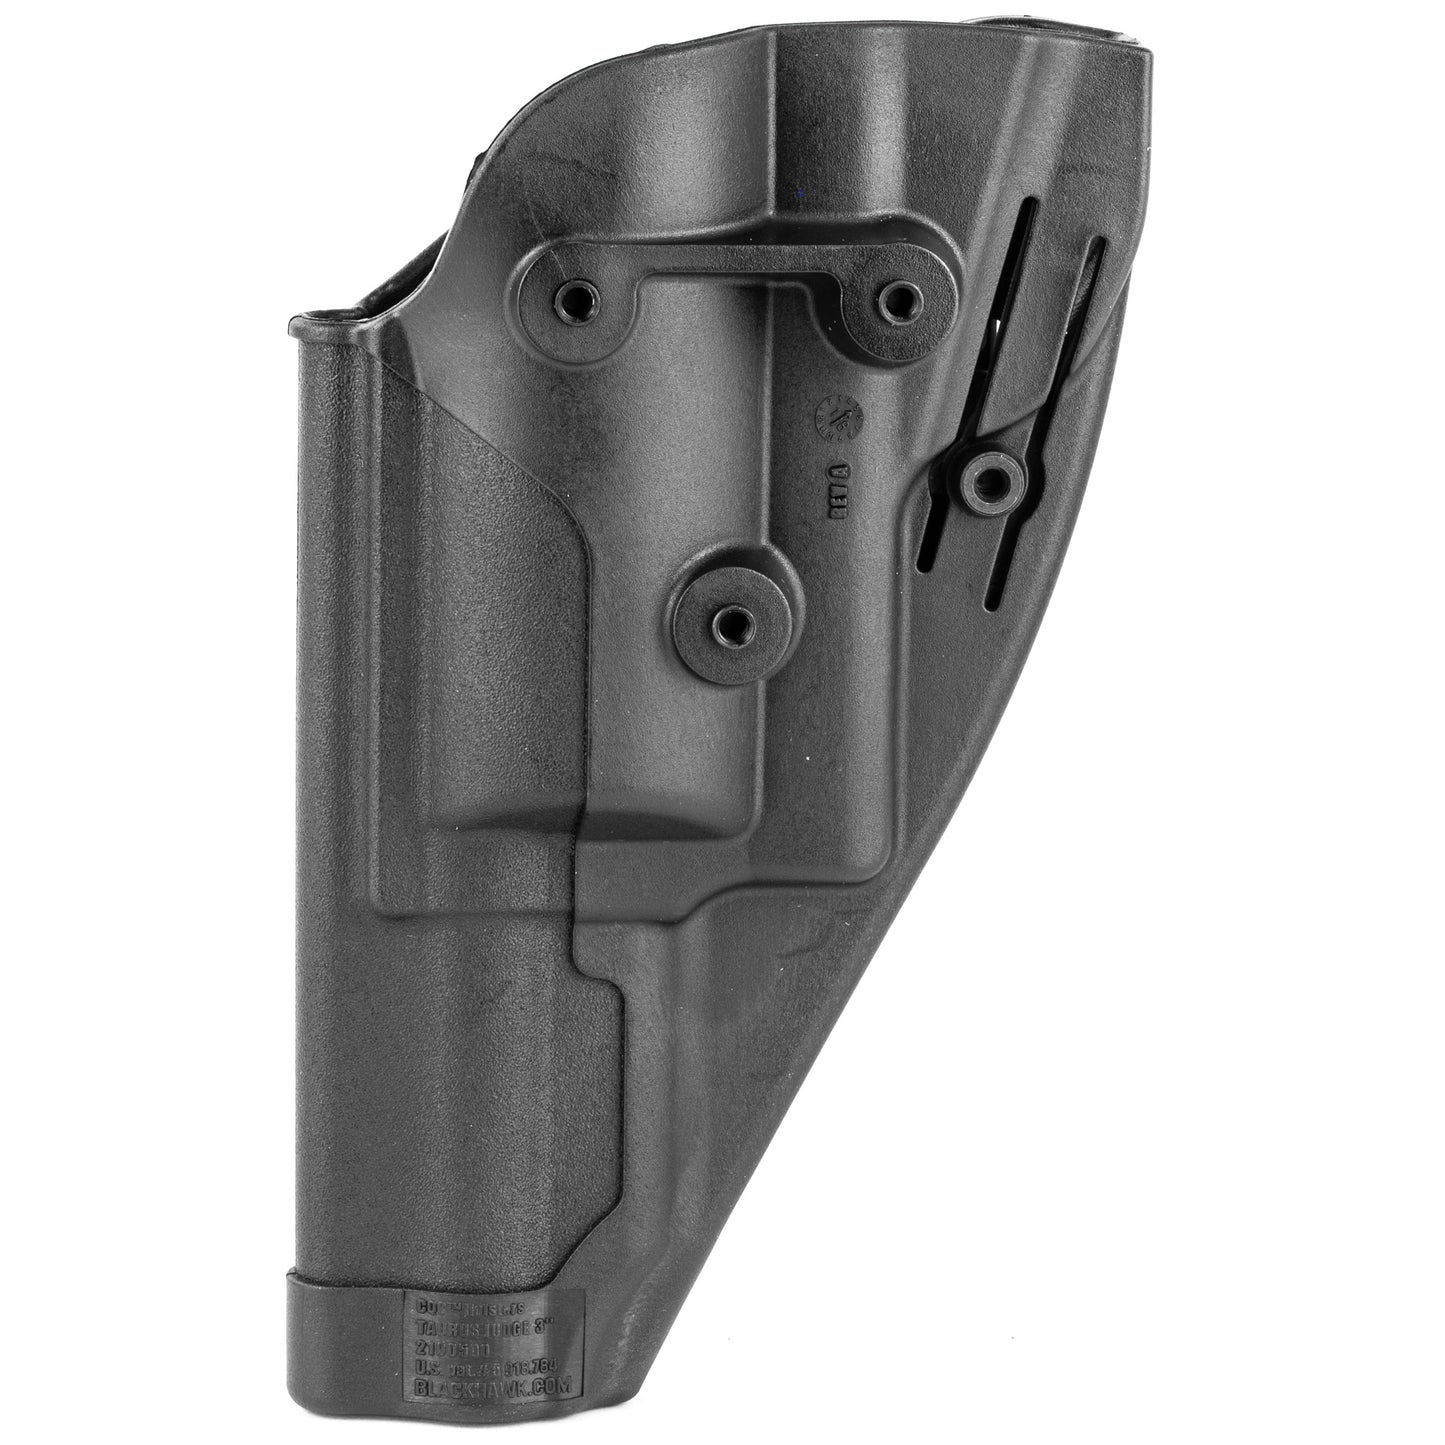 BLACKHAWK, CQC SERPA Holster With Belt and Paddle Attachment, Fits Taurus Judge 3" Cylinder, Right Hand, Black